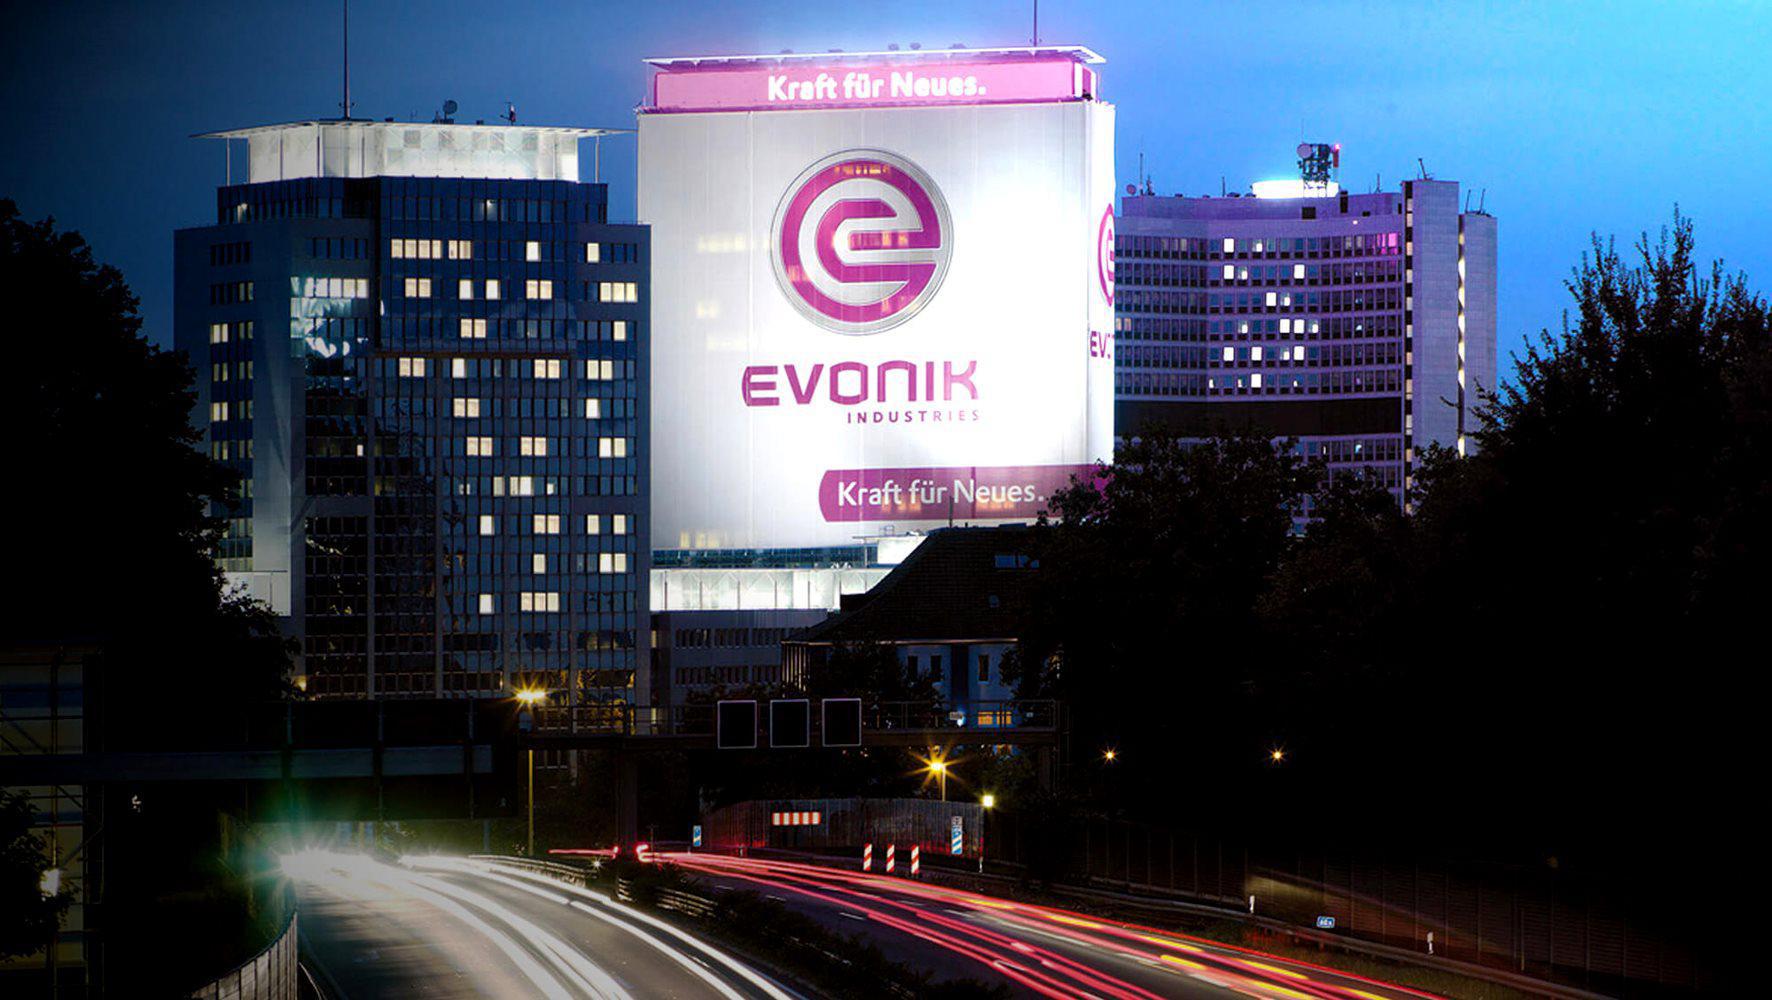 Evonik at the 22nd Iran International Oil, Gas, Refining and Petrochemicals Exhibition